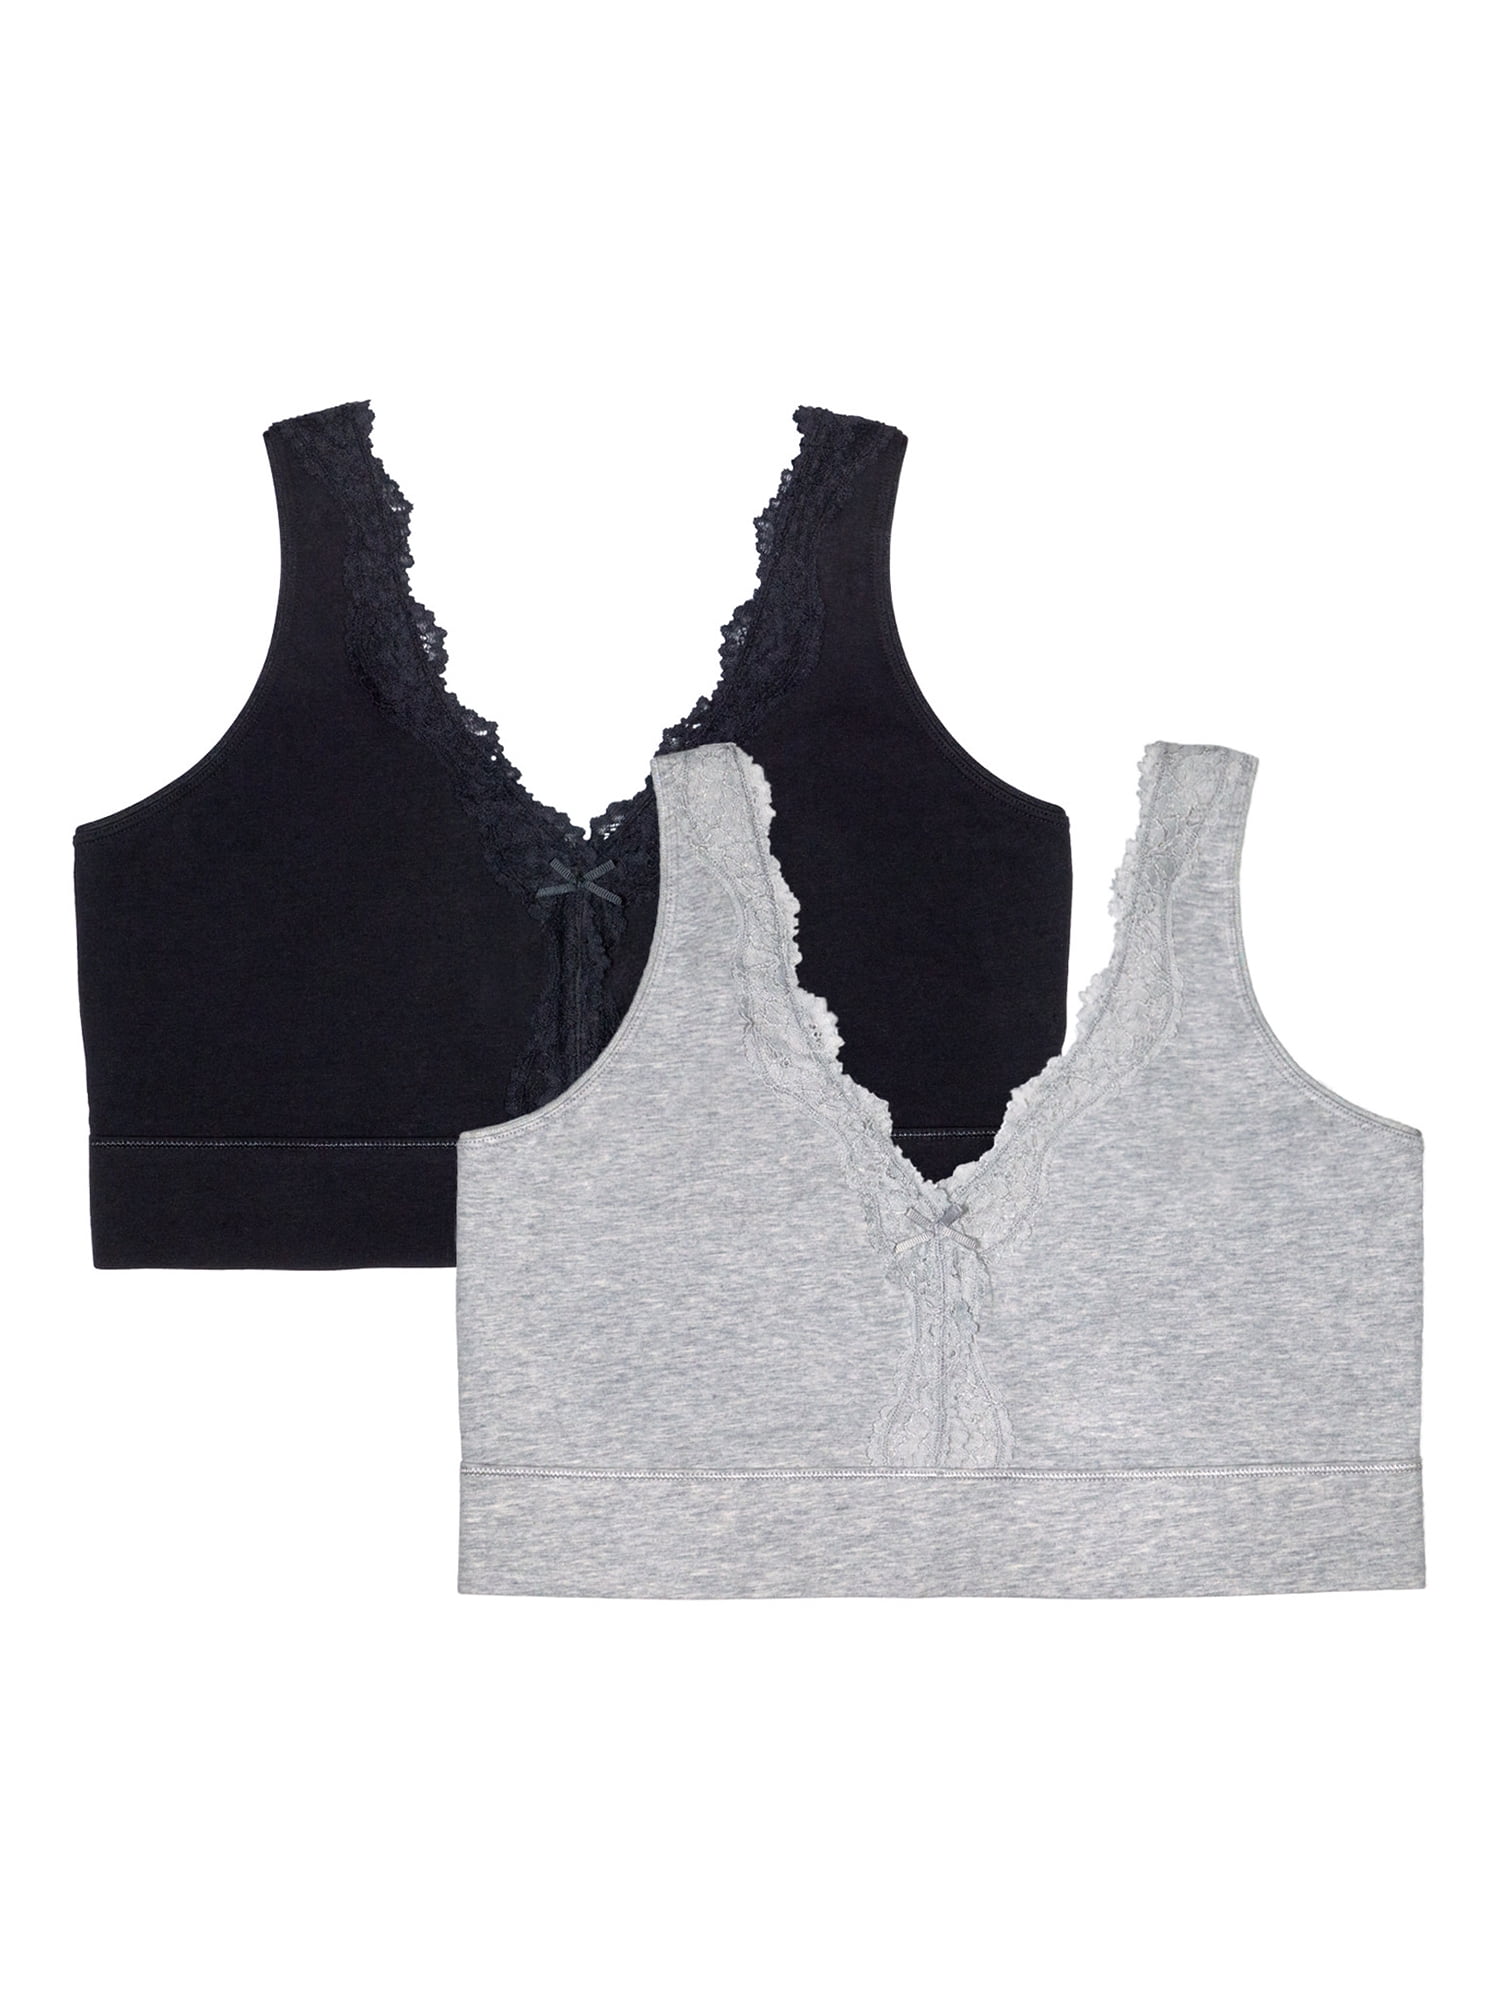 Fruit of the Loom Women's Front Close Builtup Sports Bra, Black Hue/Heather  Grey 2-Pack, 38 - Coupon Codes, Promo Codes, Daily Deals, Save Money Today